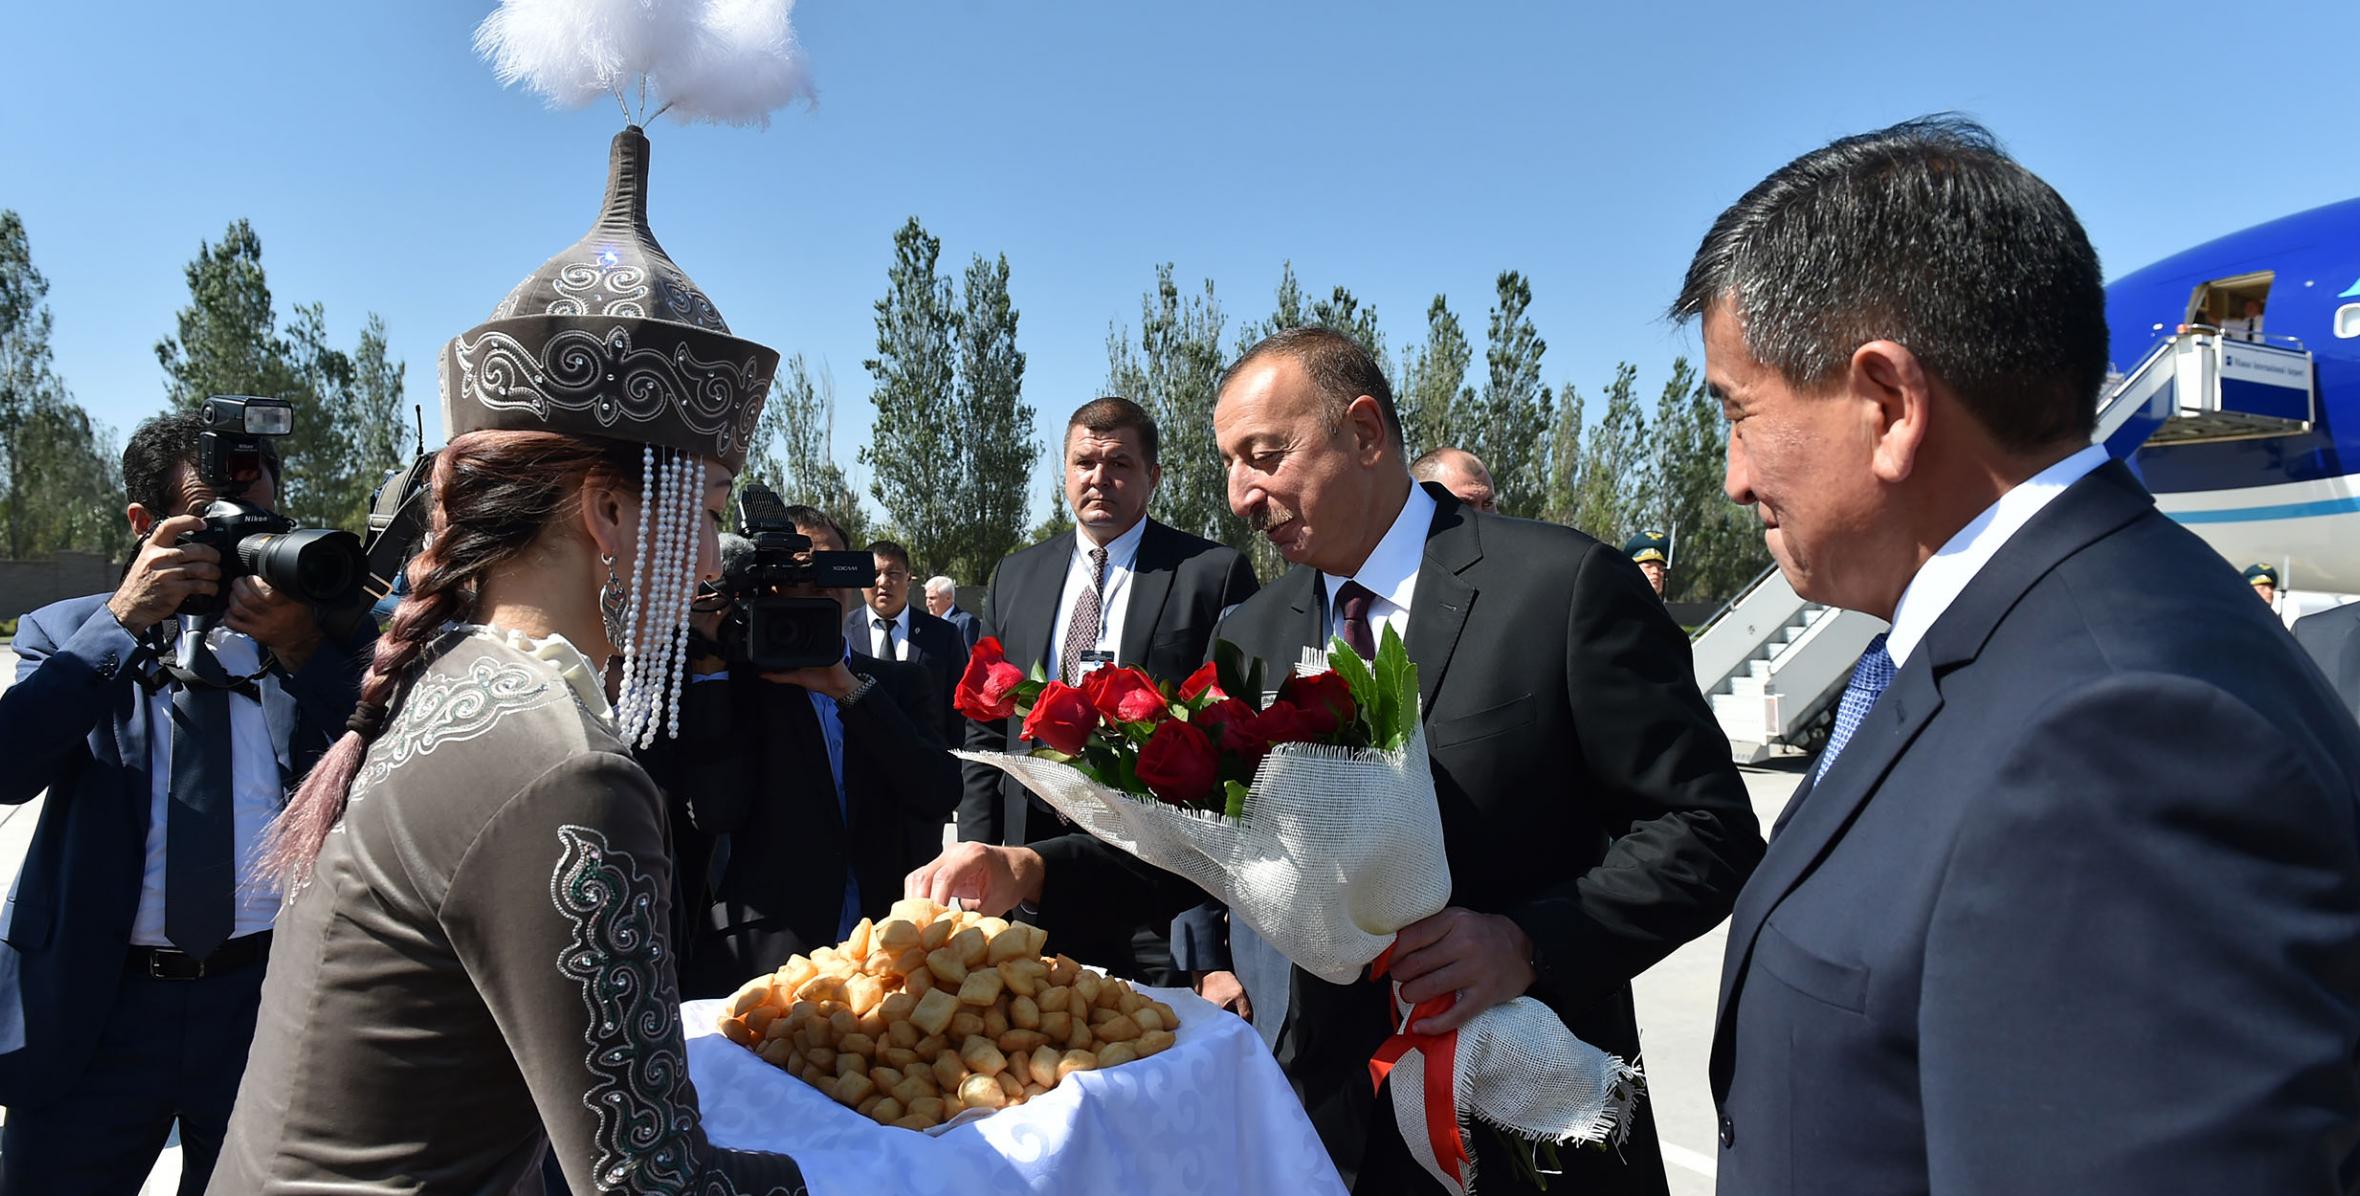 Ilham Aliyev arrived in Kyrgyzstan for a visit